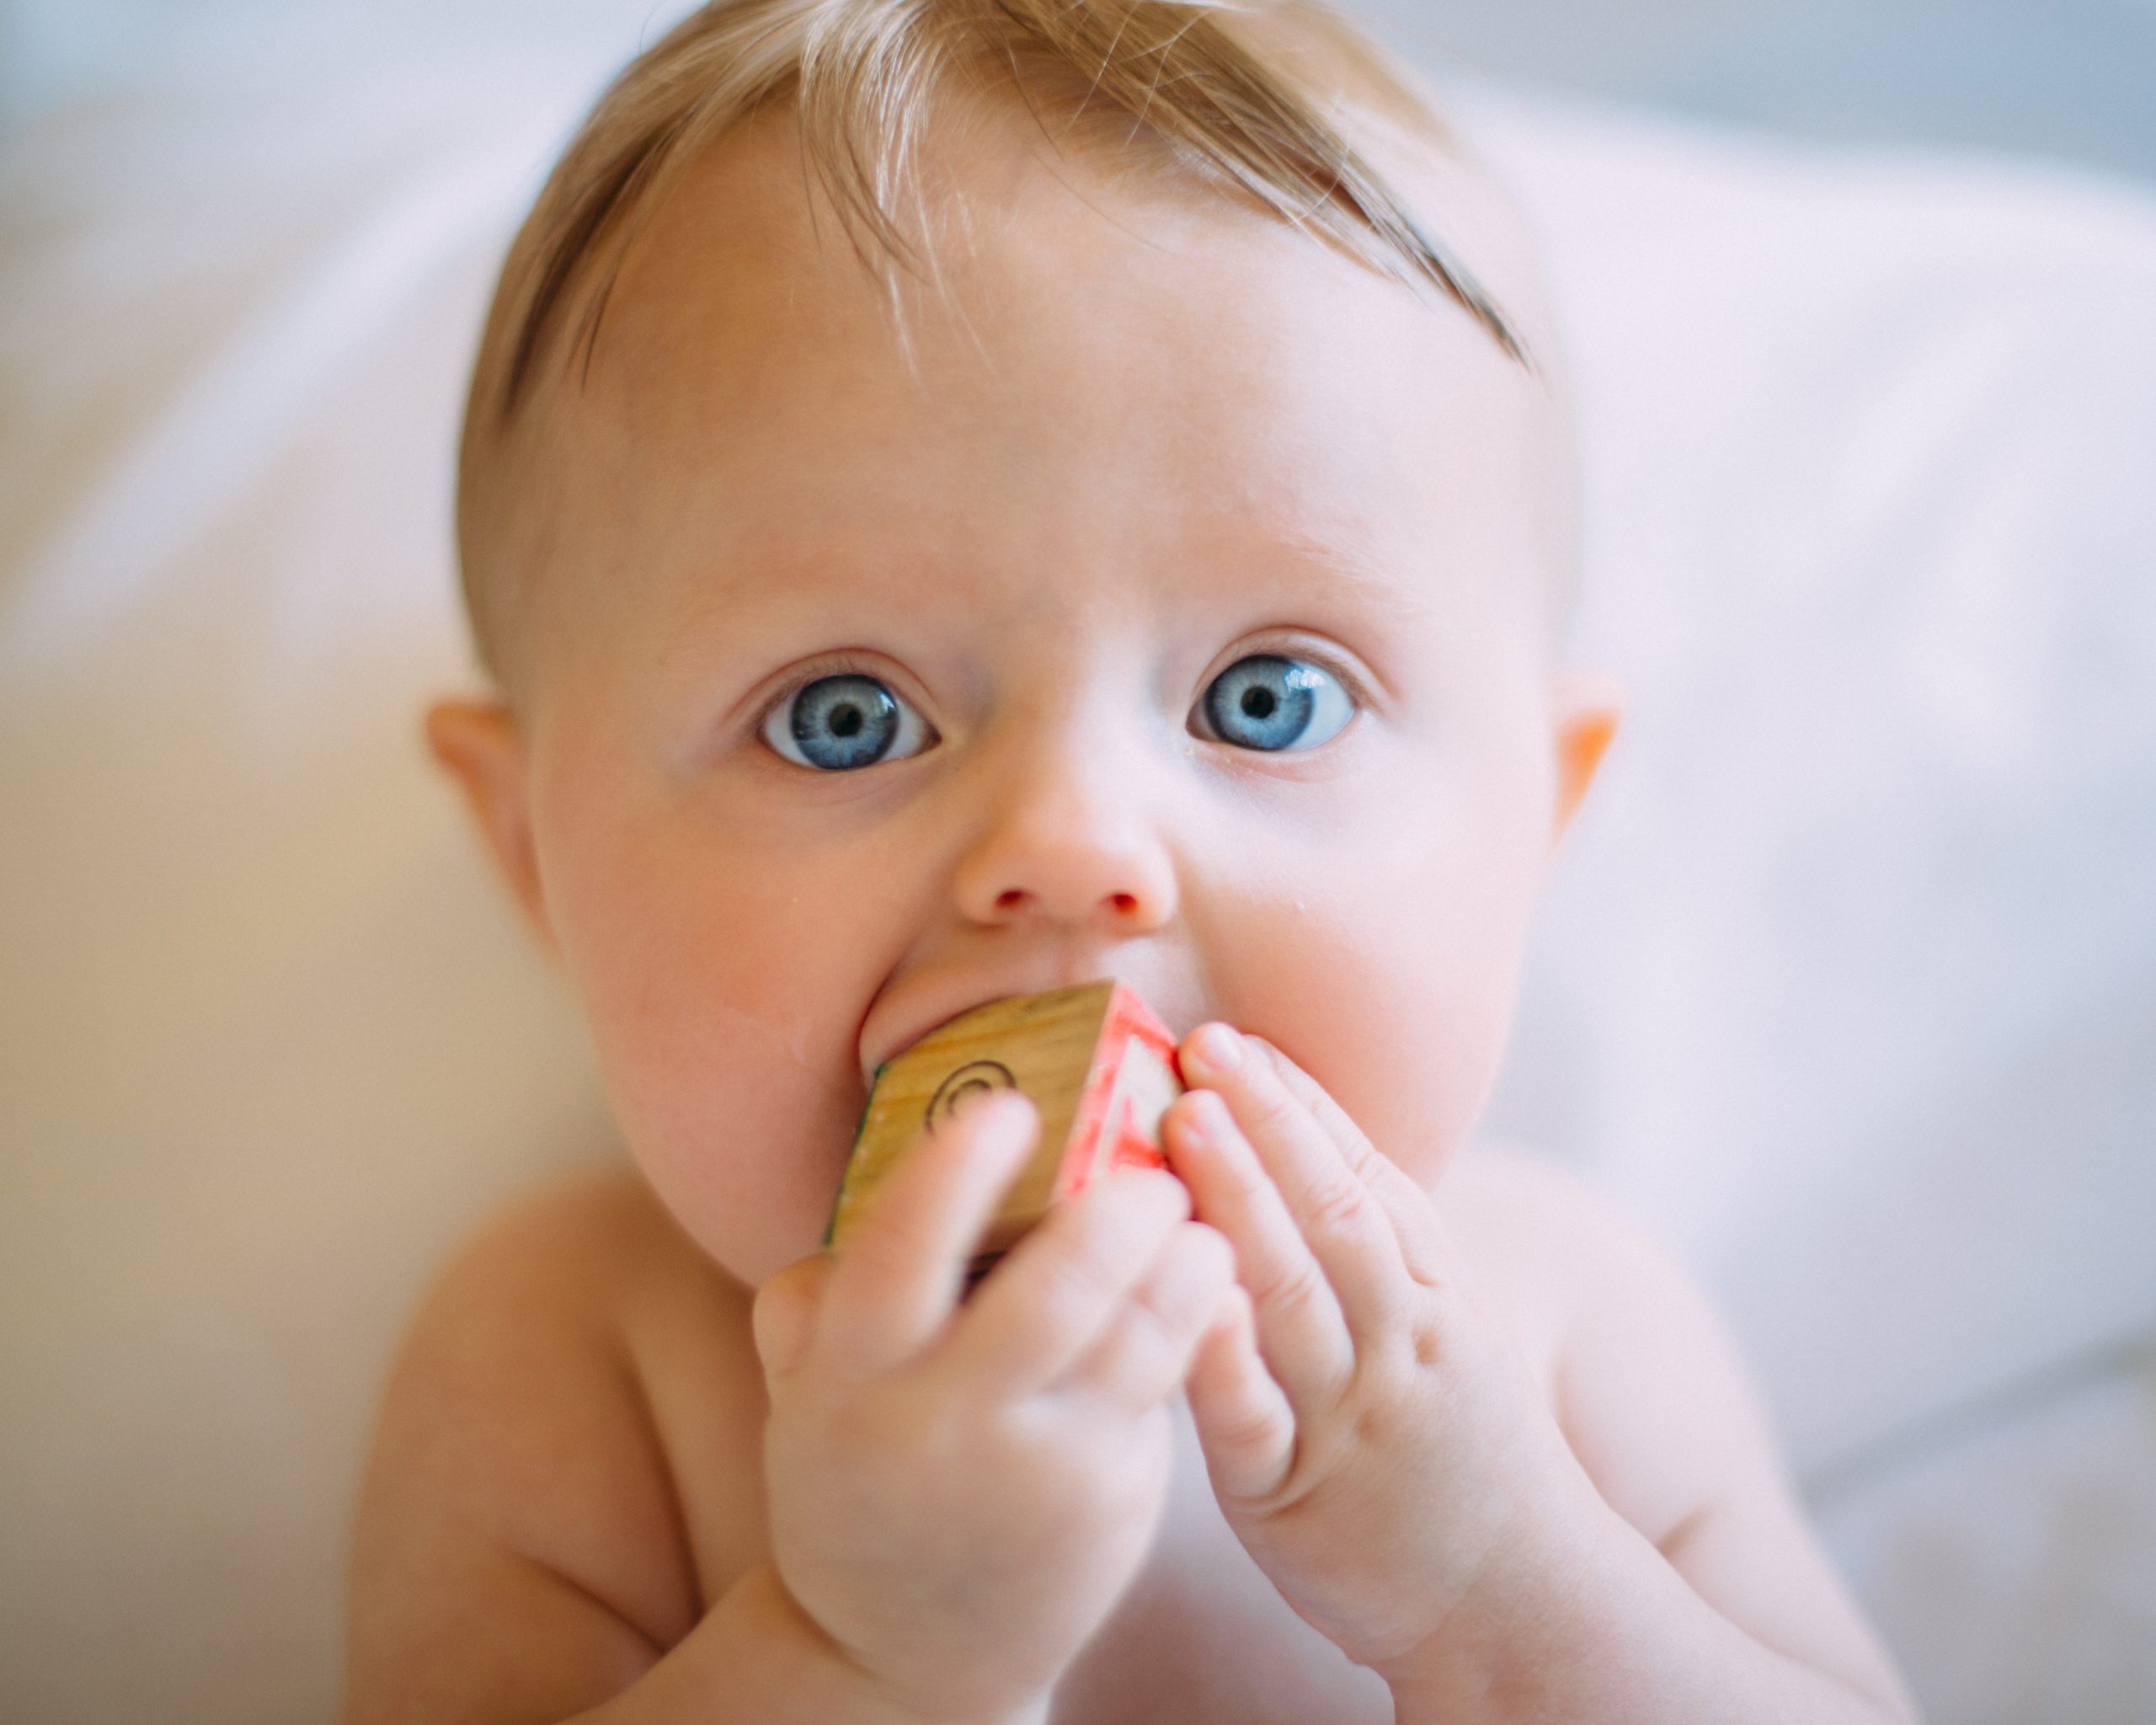 Close up photo of a toddler with a wooden block in their mouth and looking at the camera with wide eyes.